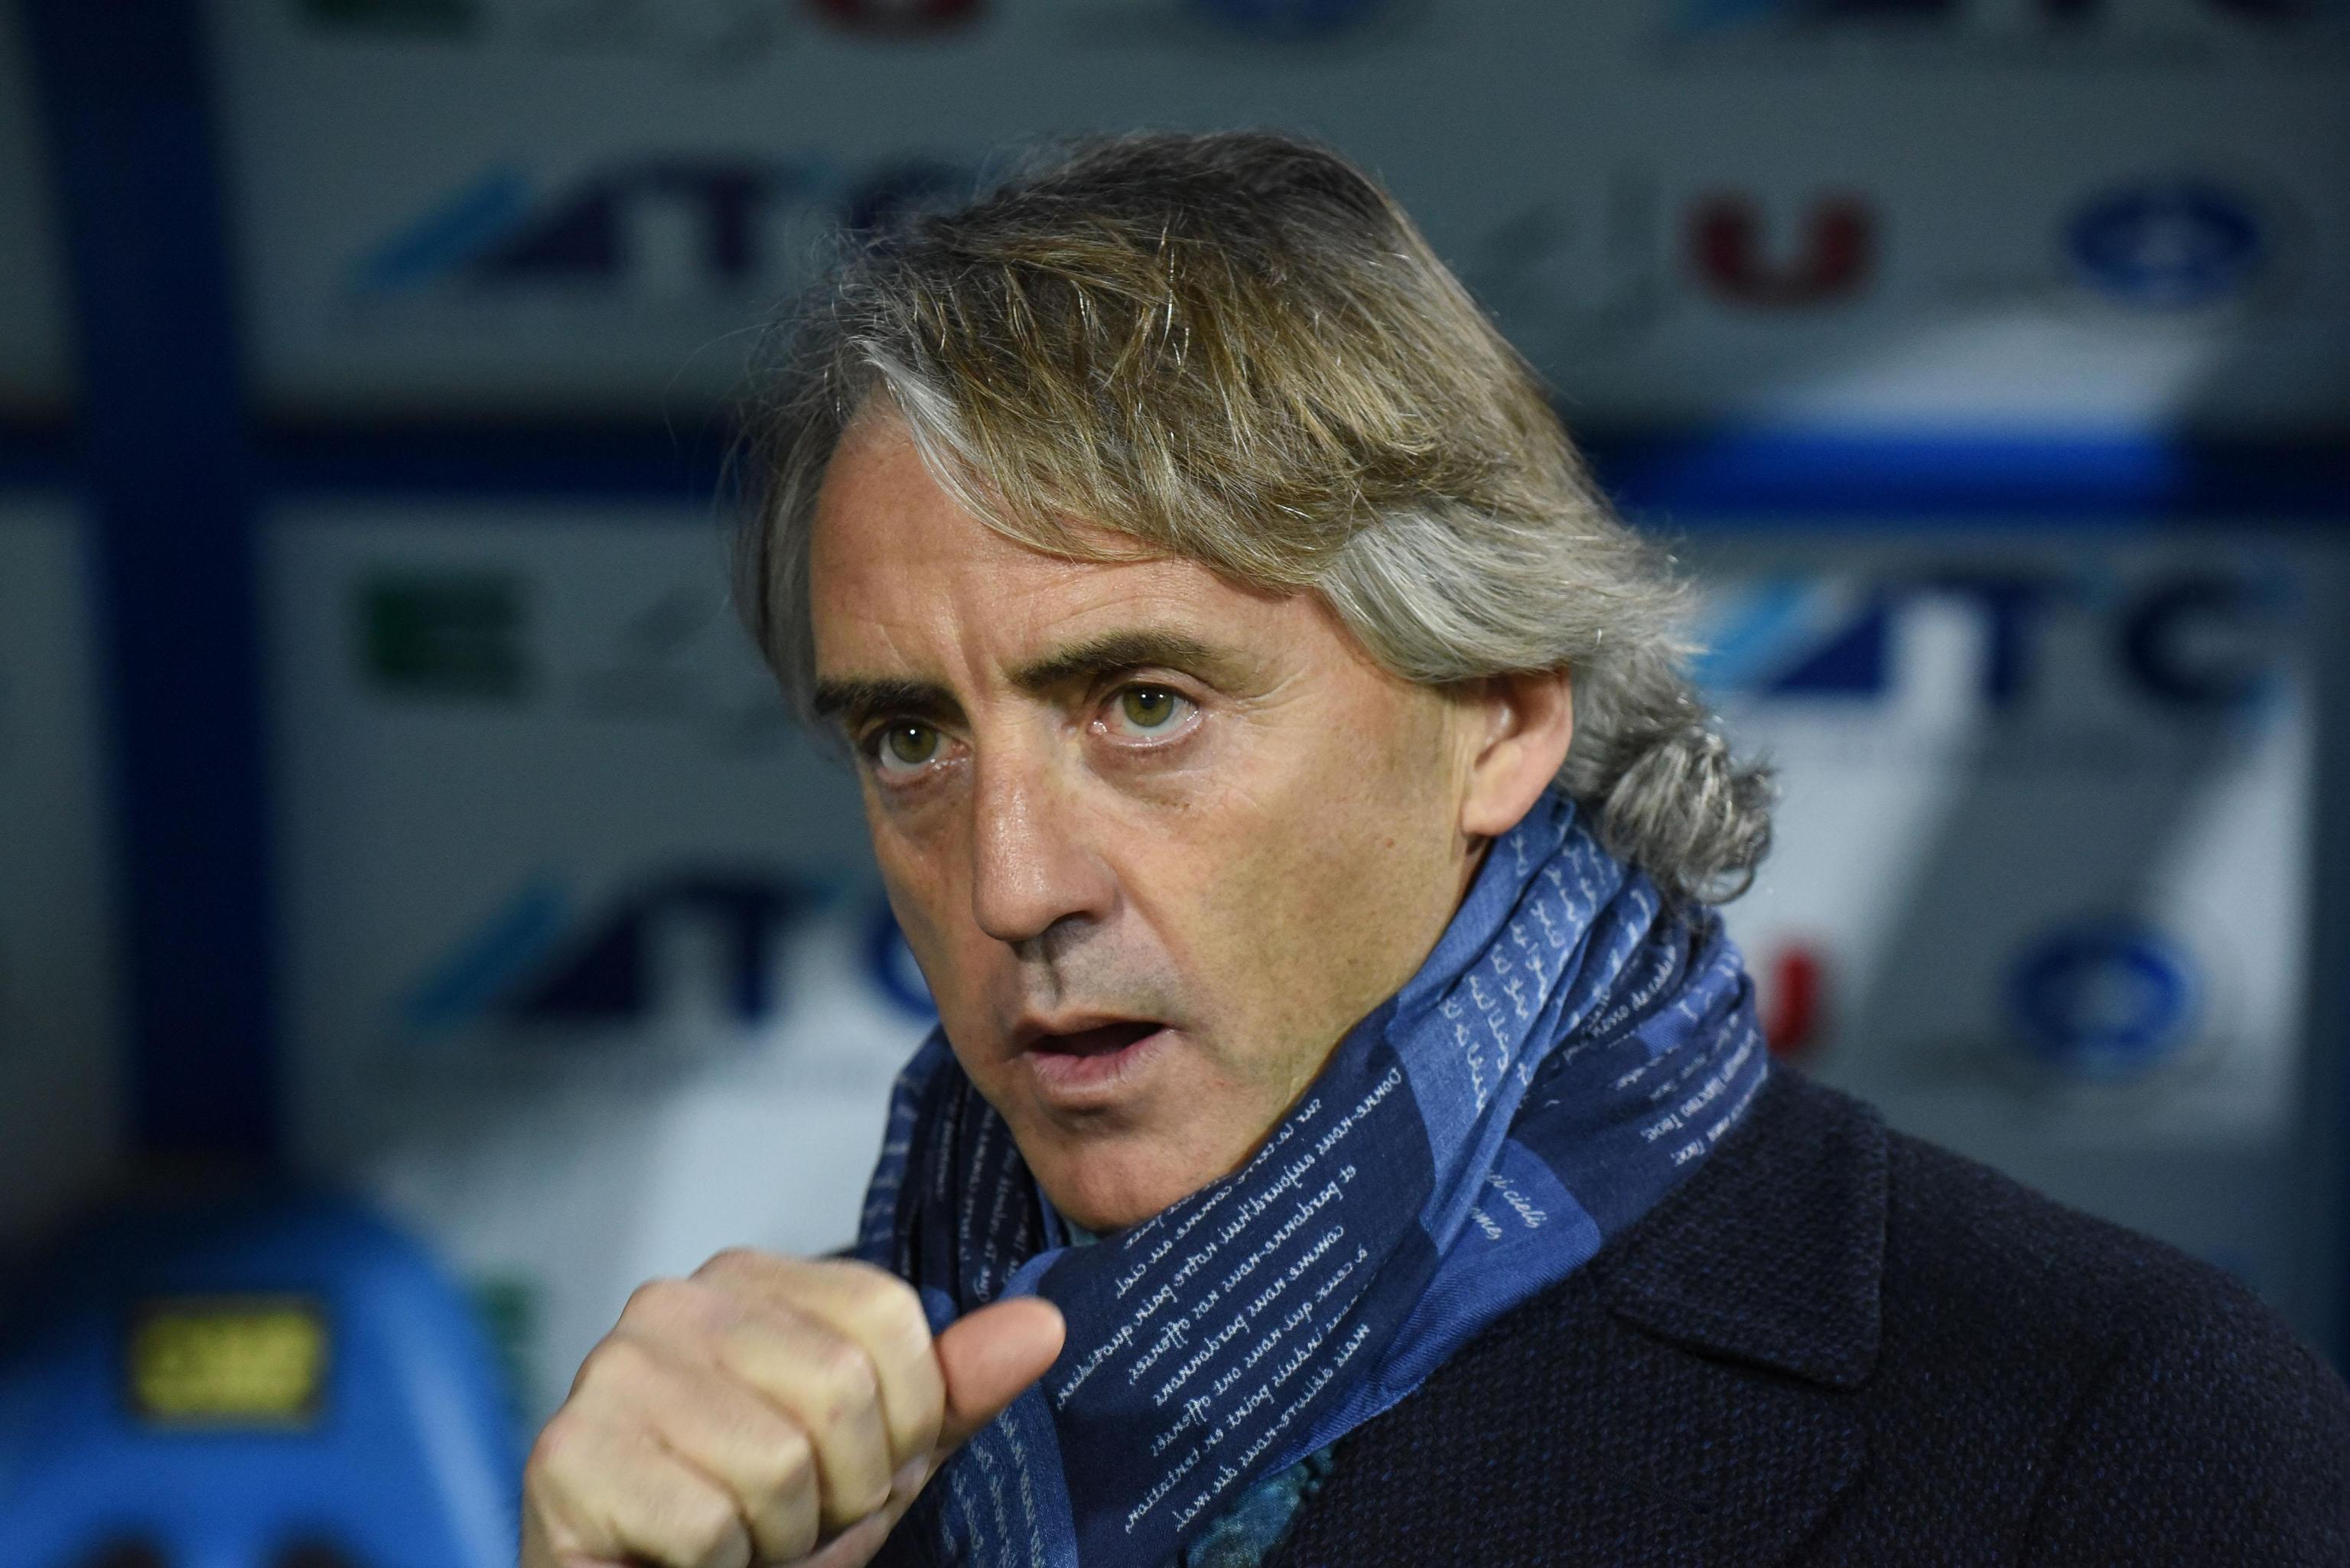 Mancini: “My main objective is to work in Europe”